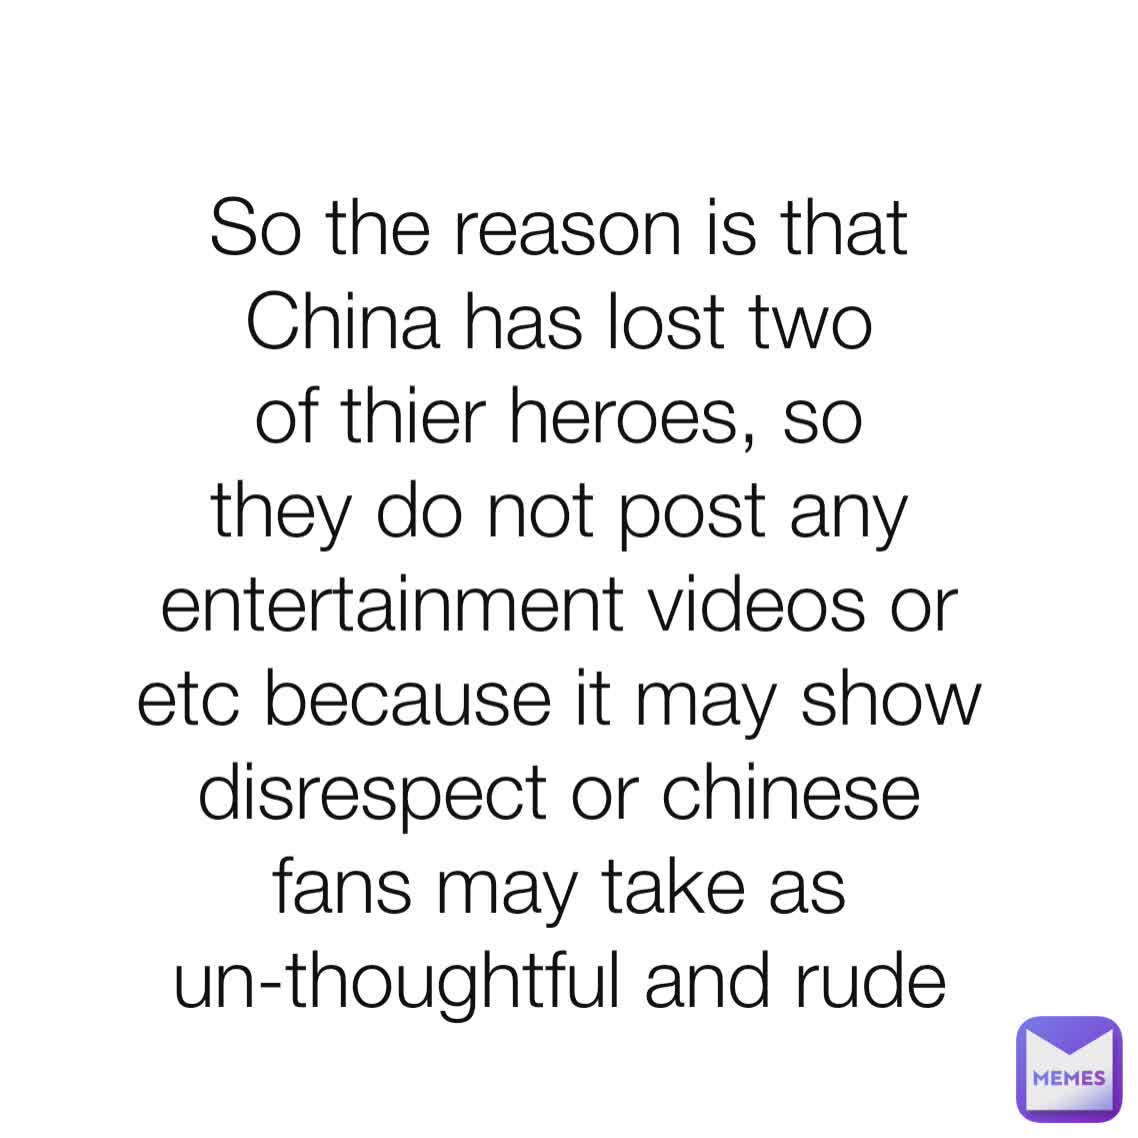 So the reason is that
China has lost two of thier heroes, so they do not post any entertainment videos or etc because it may show disrespect or chinese fans may take as un-thoughtful and rude